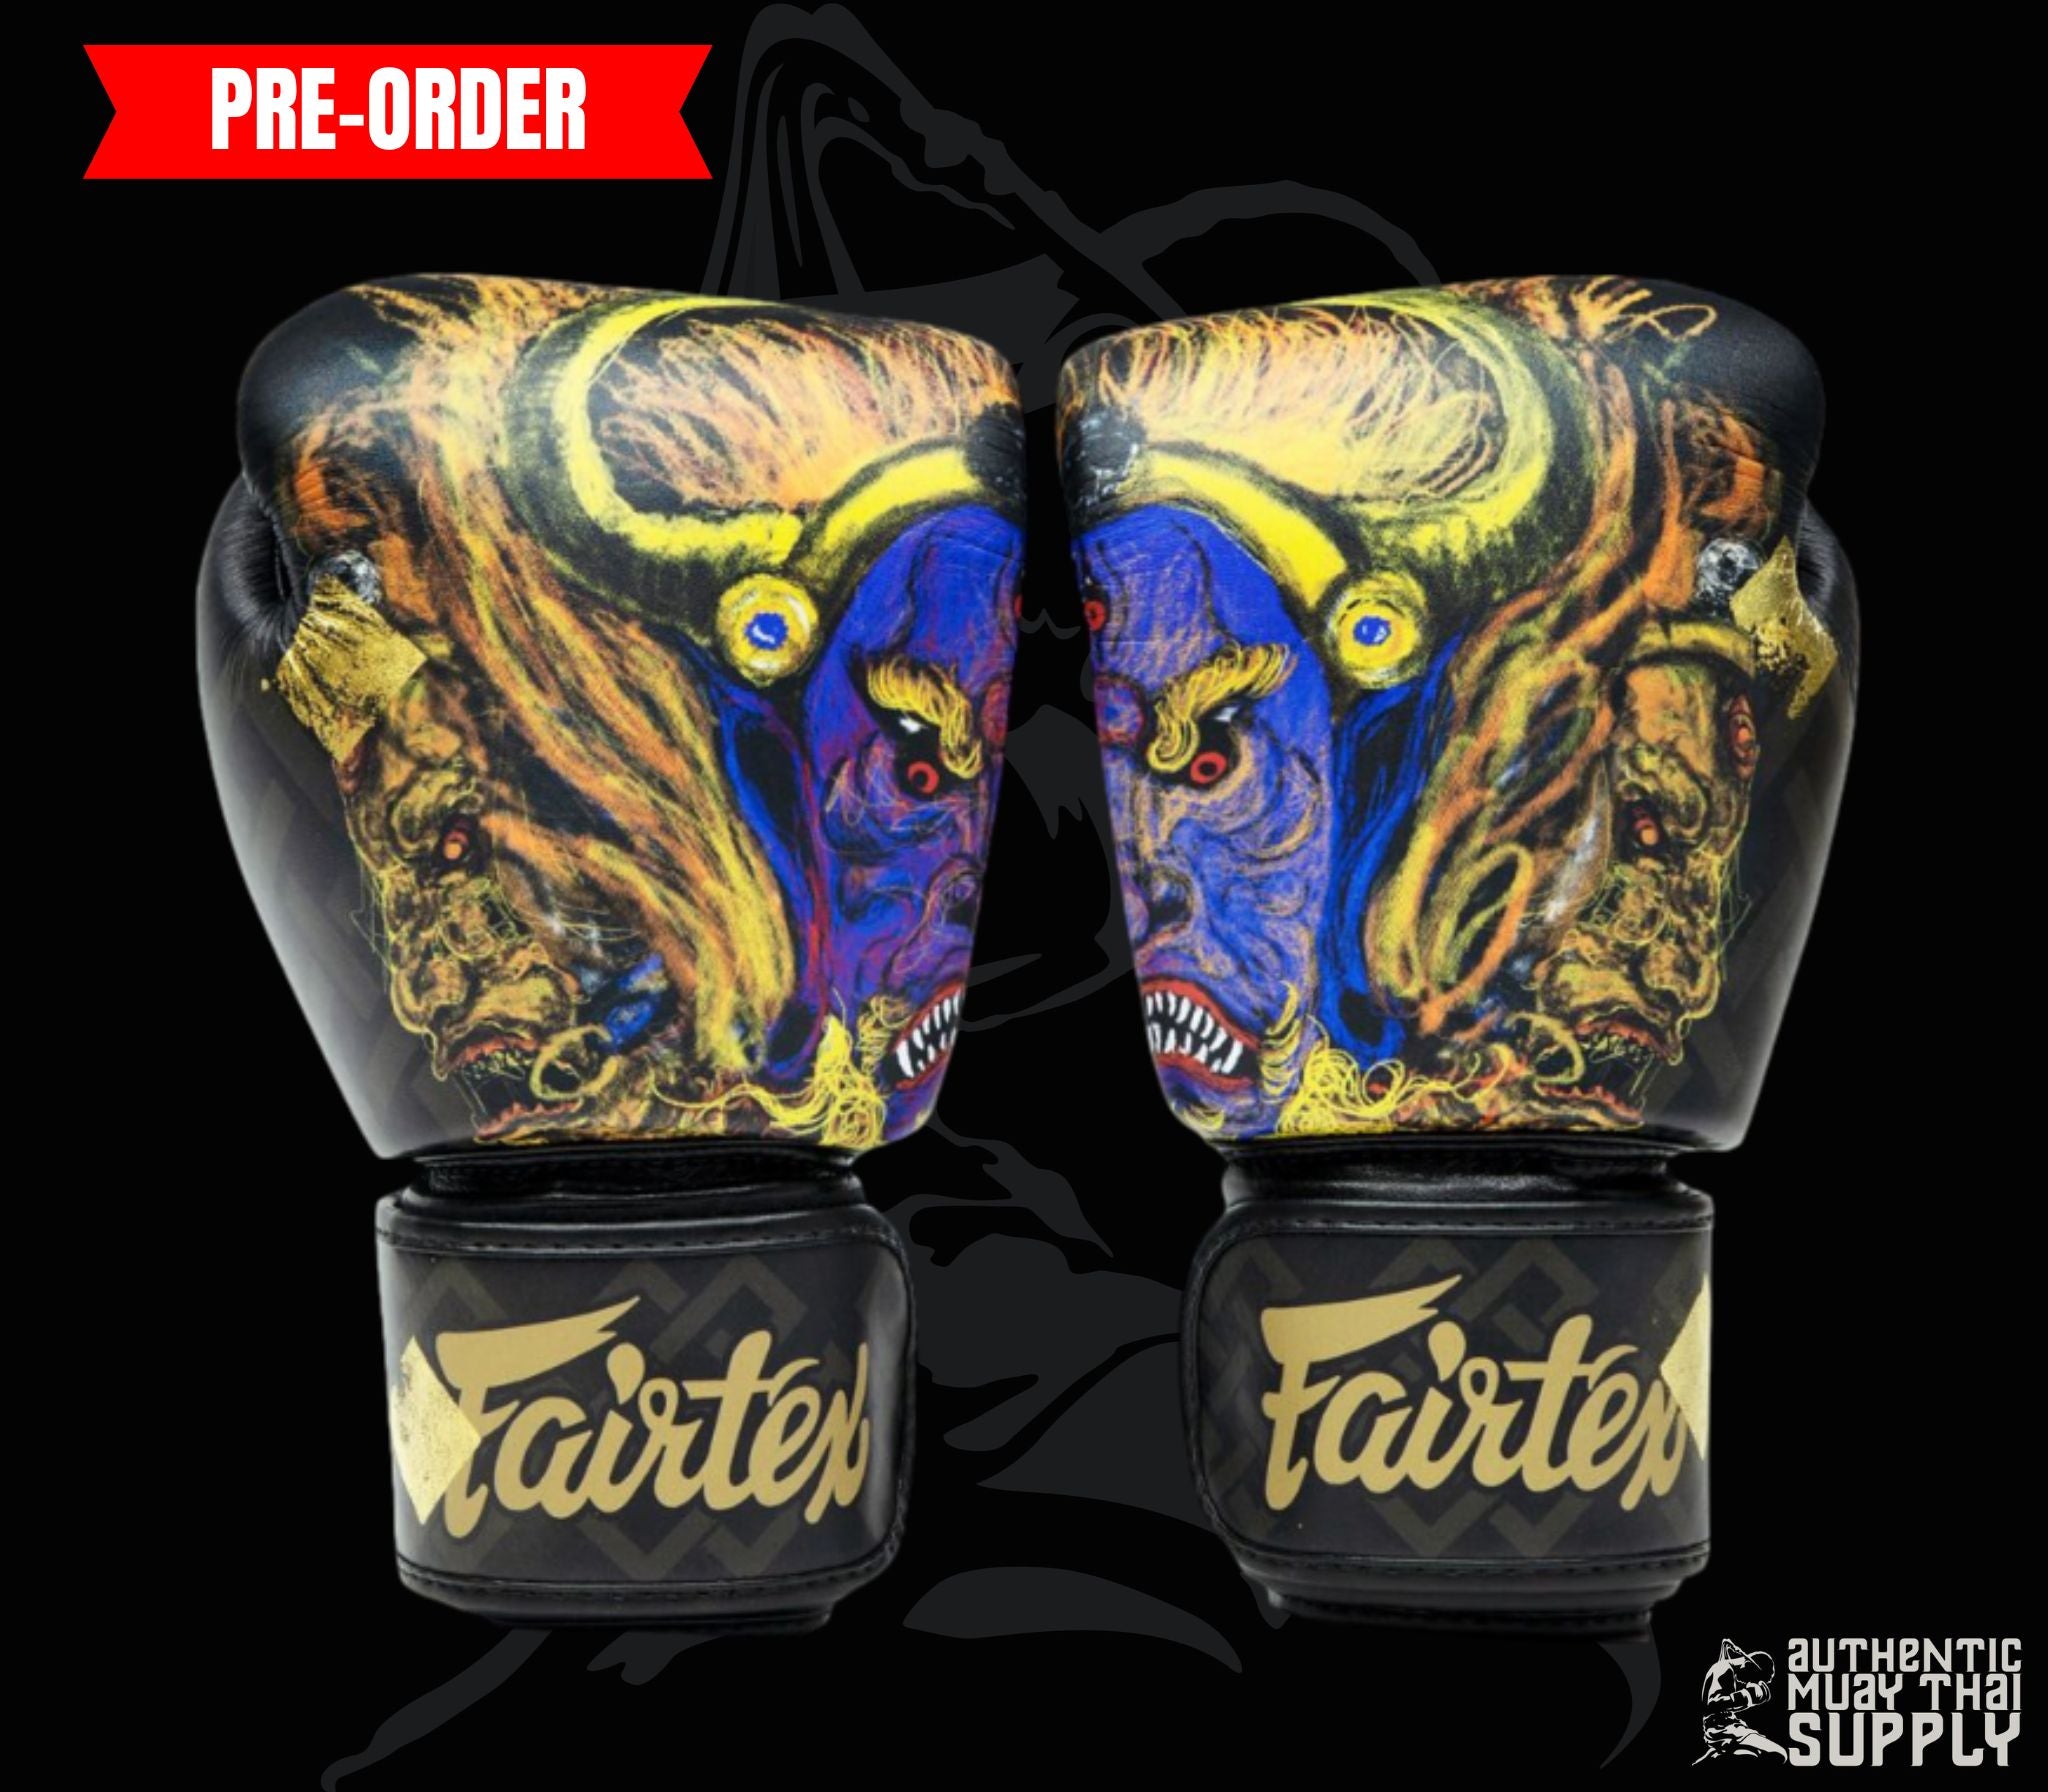 Fairtex Yamantaka Boxing Gloves with delivery from Thailand